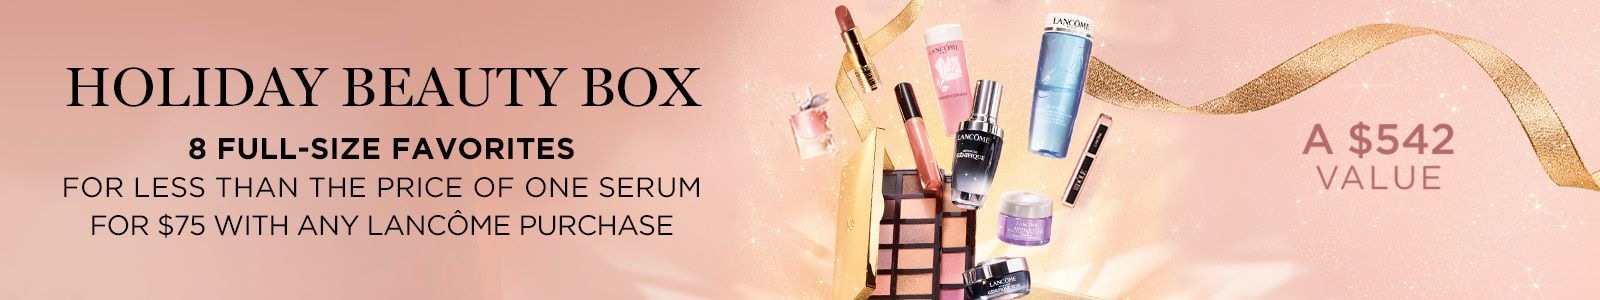 Holiday Beauty Box, 8 Full-Size Favorites, For less than the price of one serum for $75 with any Lancome purchase, A $542 Value